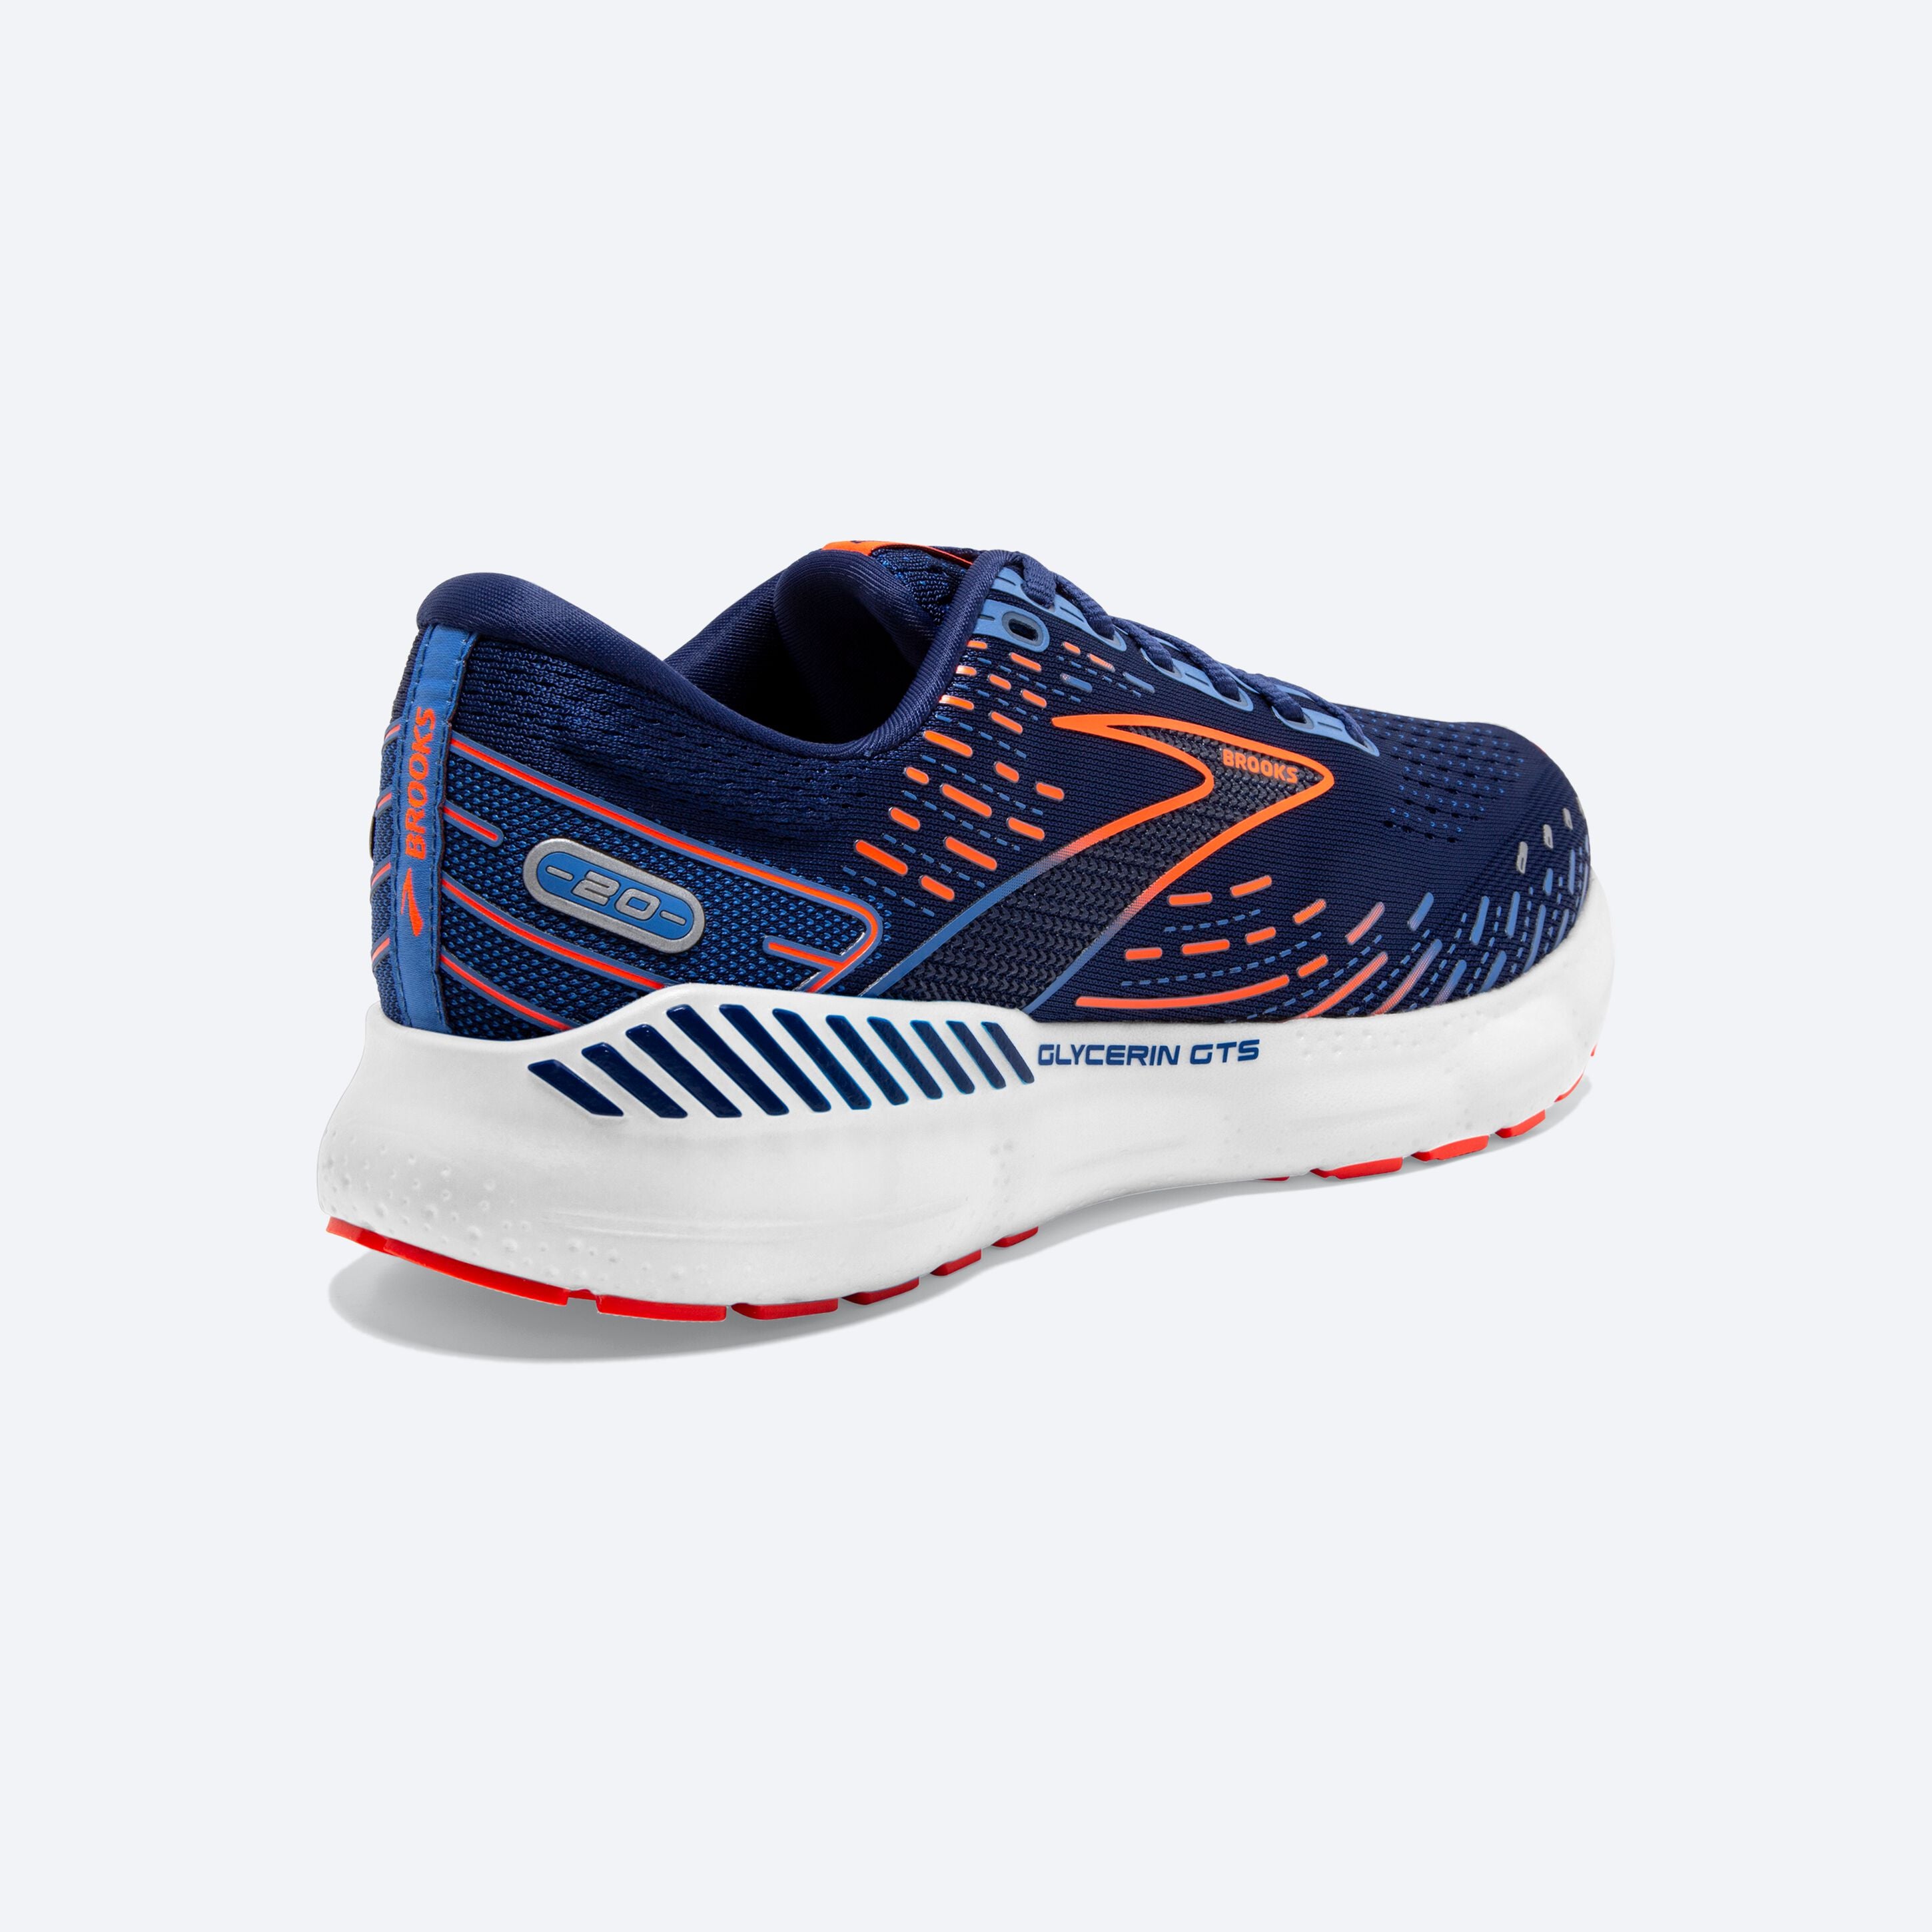 Back angle view of the Men's Glycerin GTS 20 in Blue Depths/Palace Blue/Orange